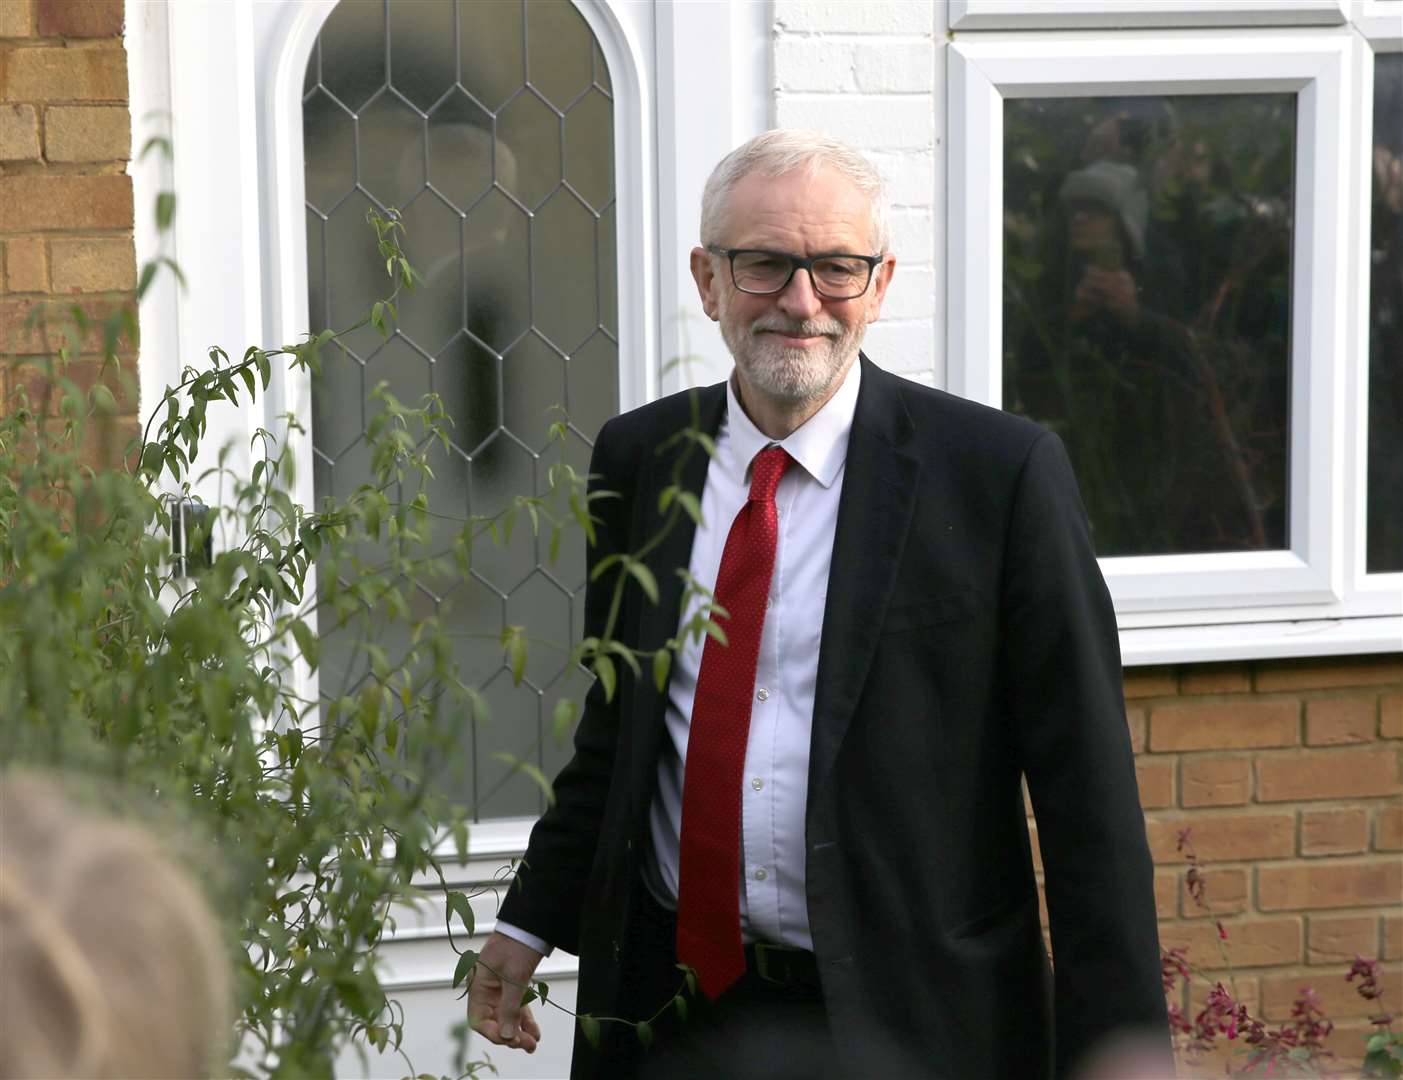 Labour Party leader Jeremy Corbyn leaves his home in Islington after the Conservative Party was returned to power (Isabel Infantes/PA)